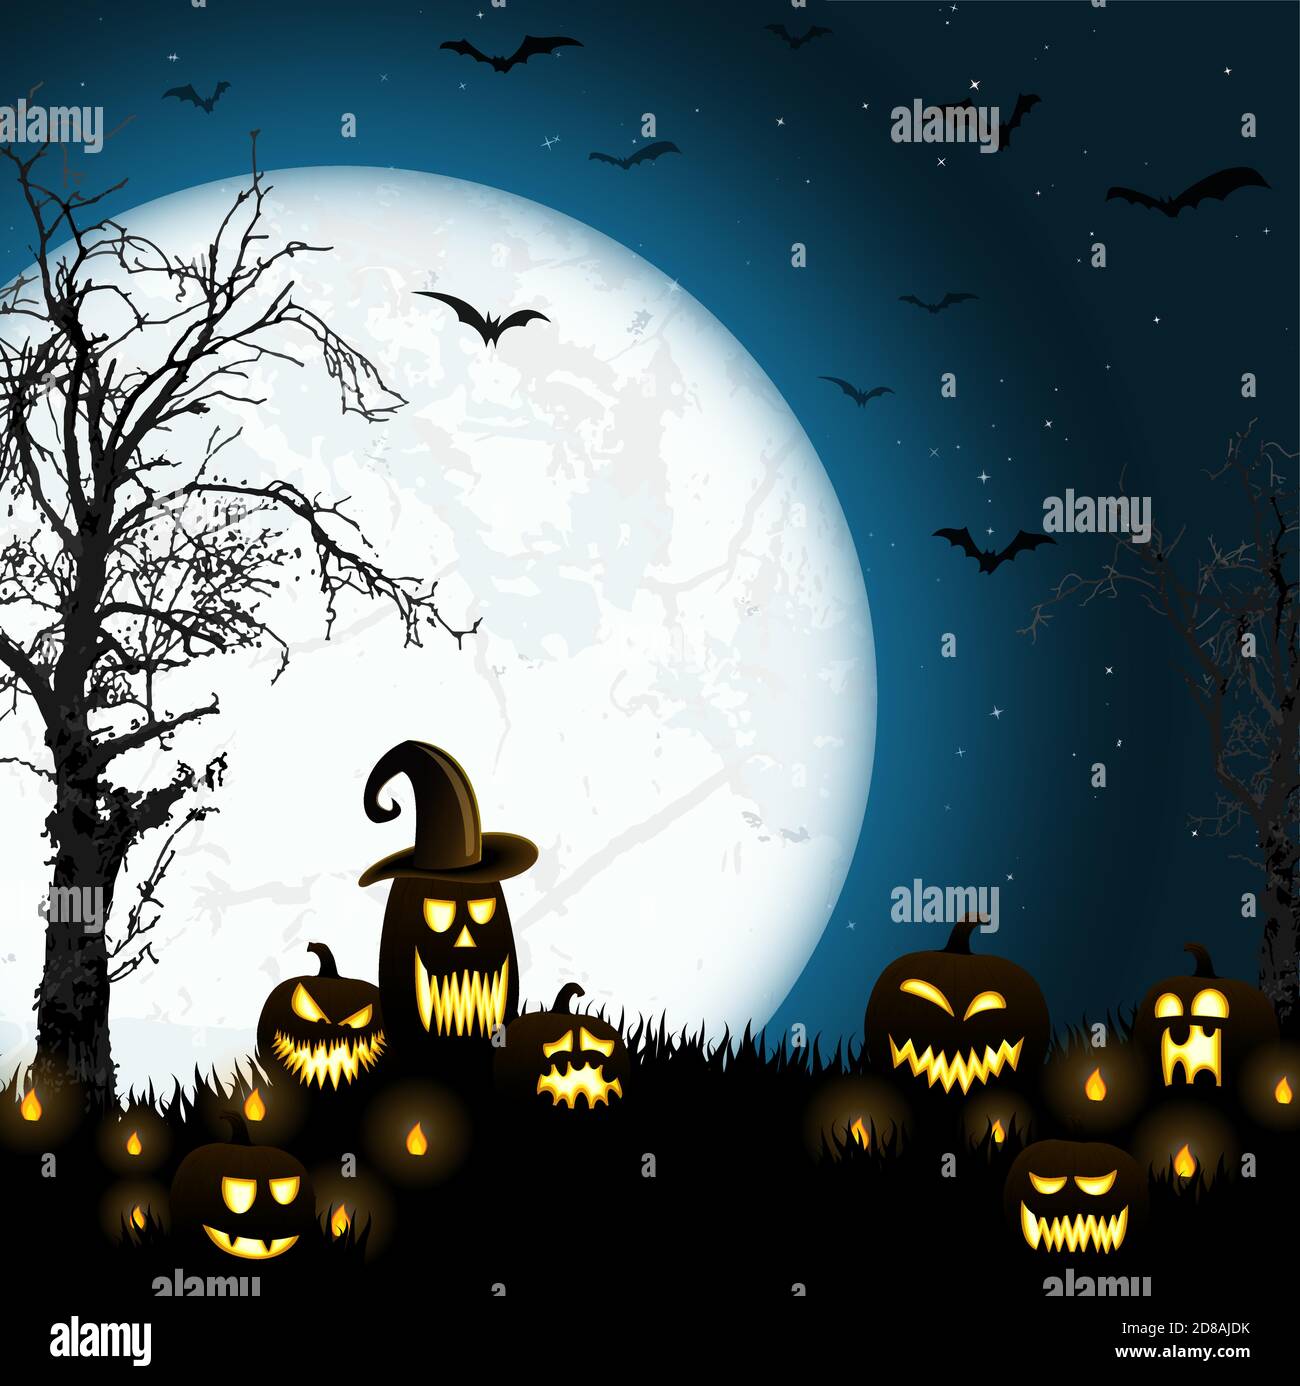 spooky halloween dead tree with some scary pumpkins in front of an full moon with bats Stock Vector